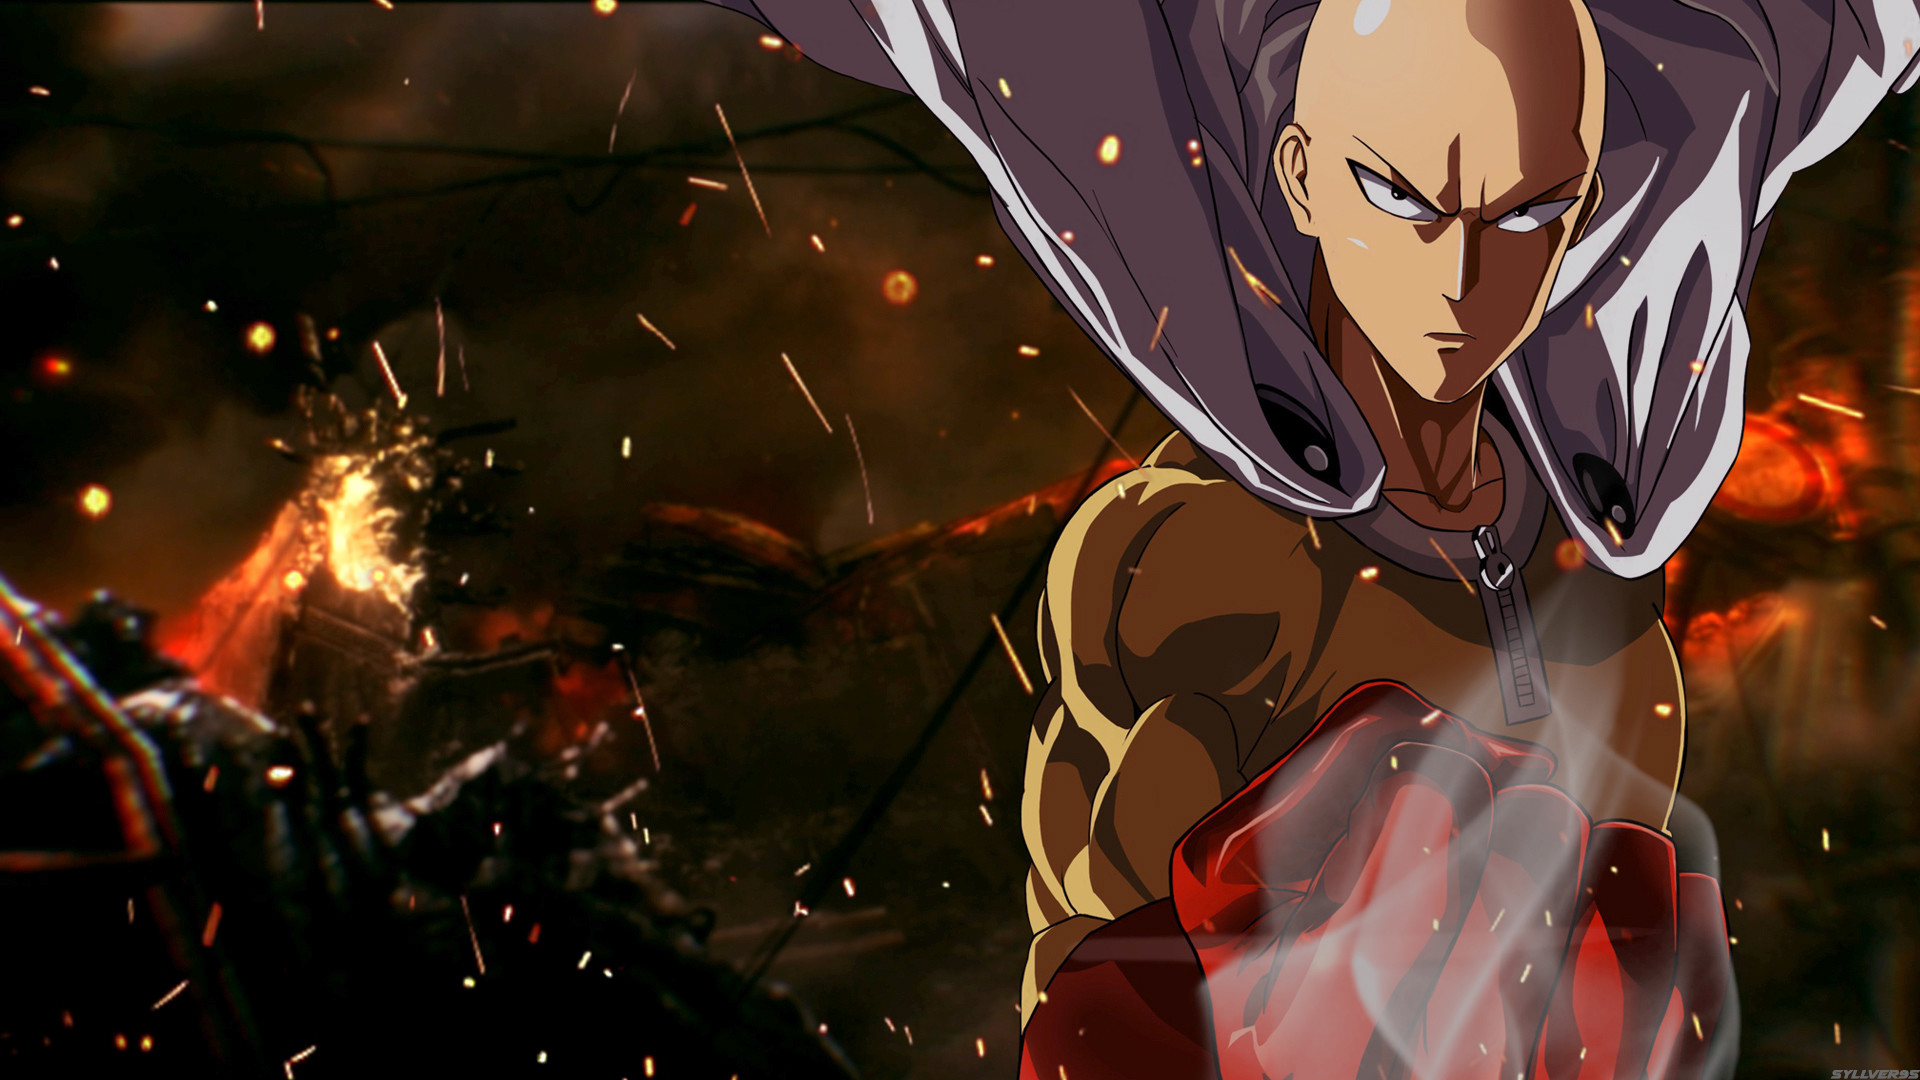 13+ Epic Anime Wallpapers for iPhone and Android by Matthew Gonzales